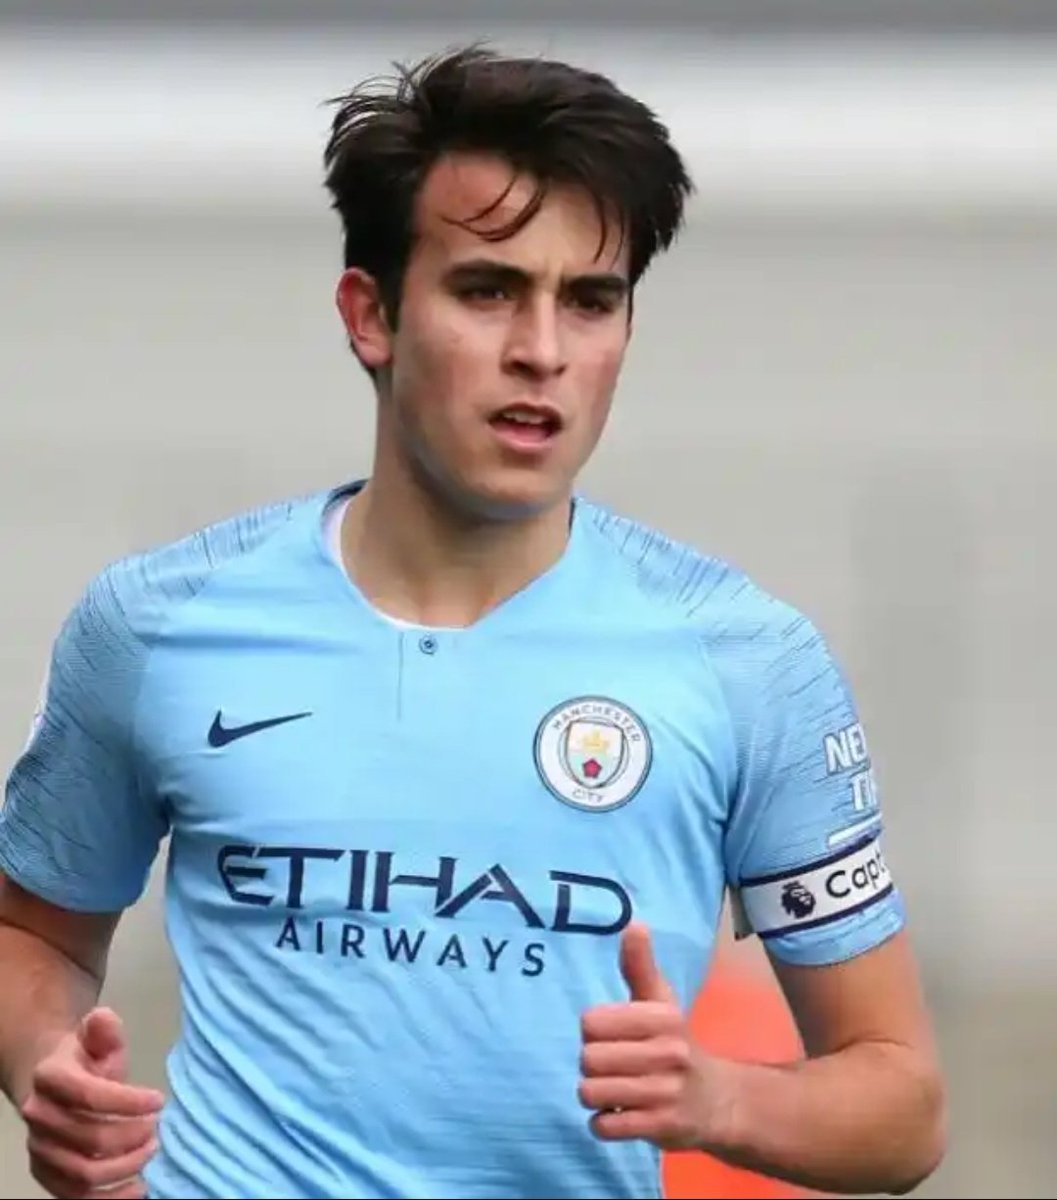 Koeman on possible addition of Eric Garcia -"We want Eric Garcia, but there are only few days left of the transfer market. Hopefully we can sign him, but the economic issue is complicated."